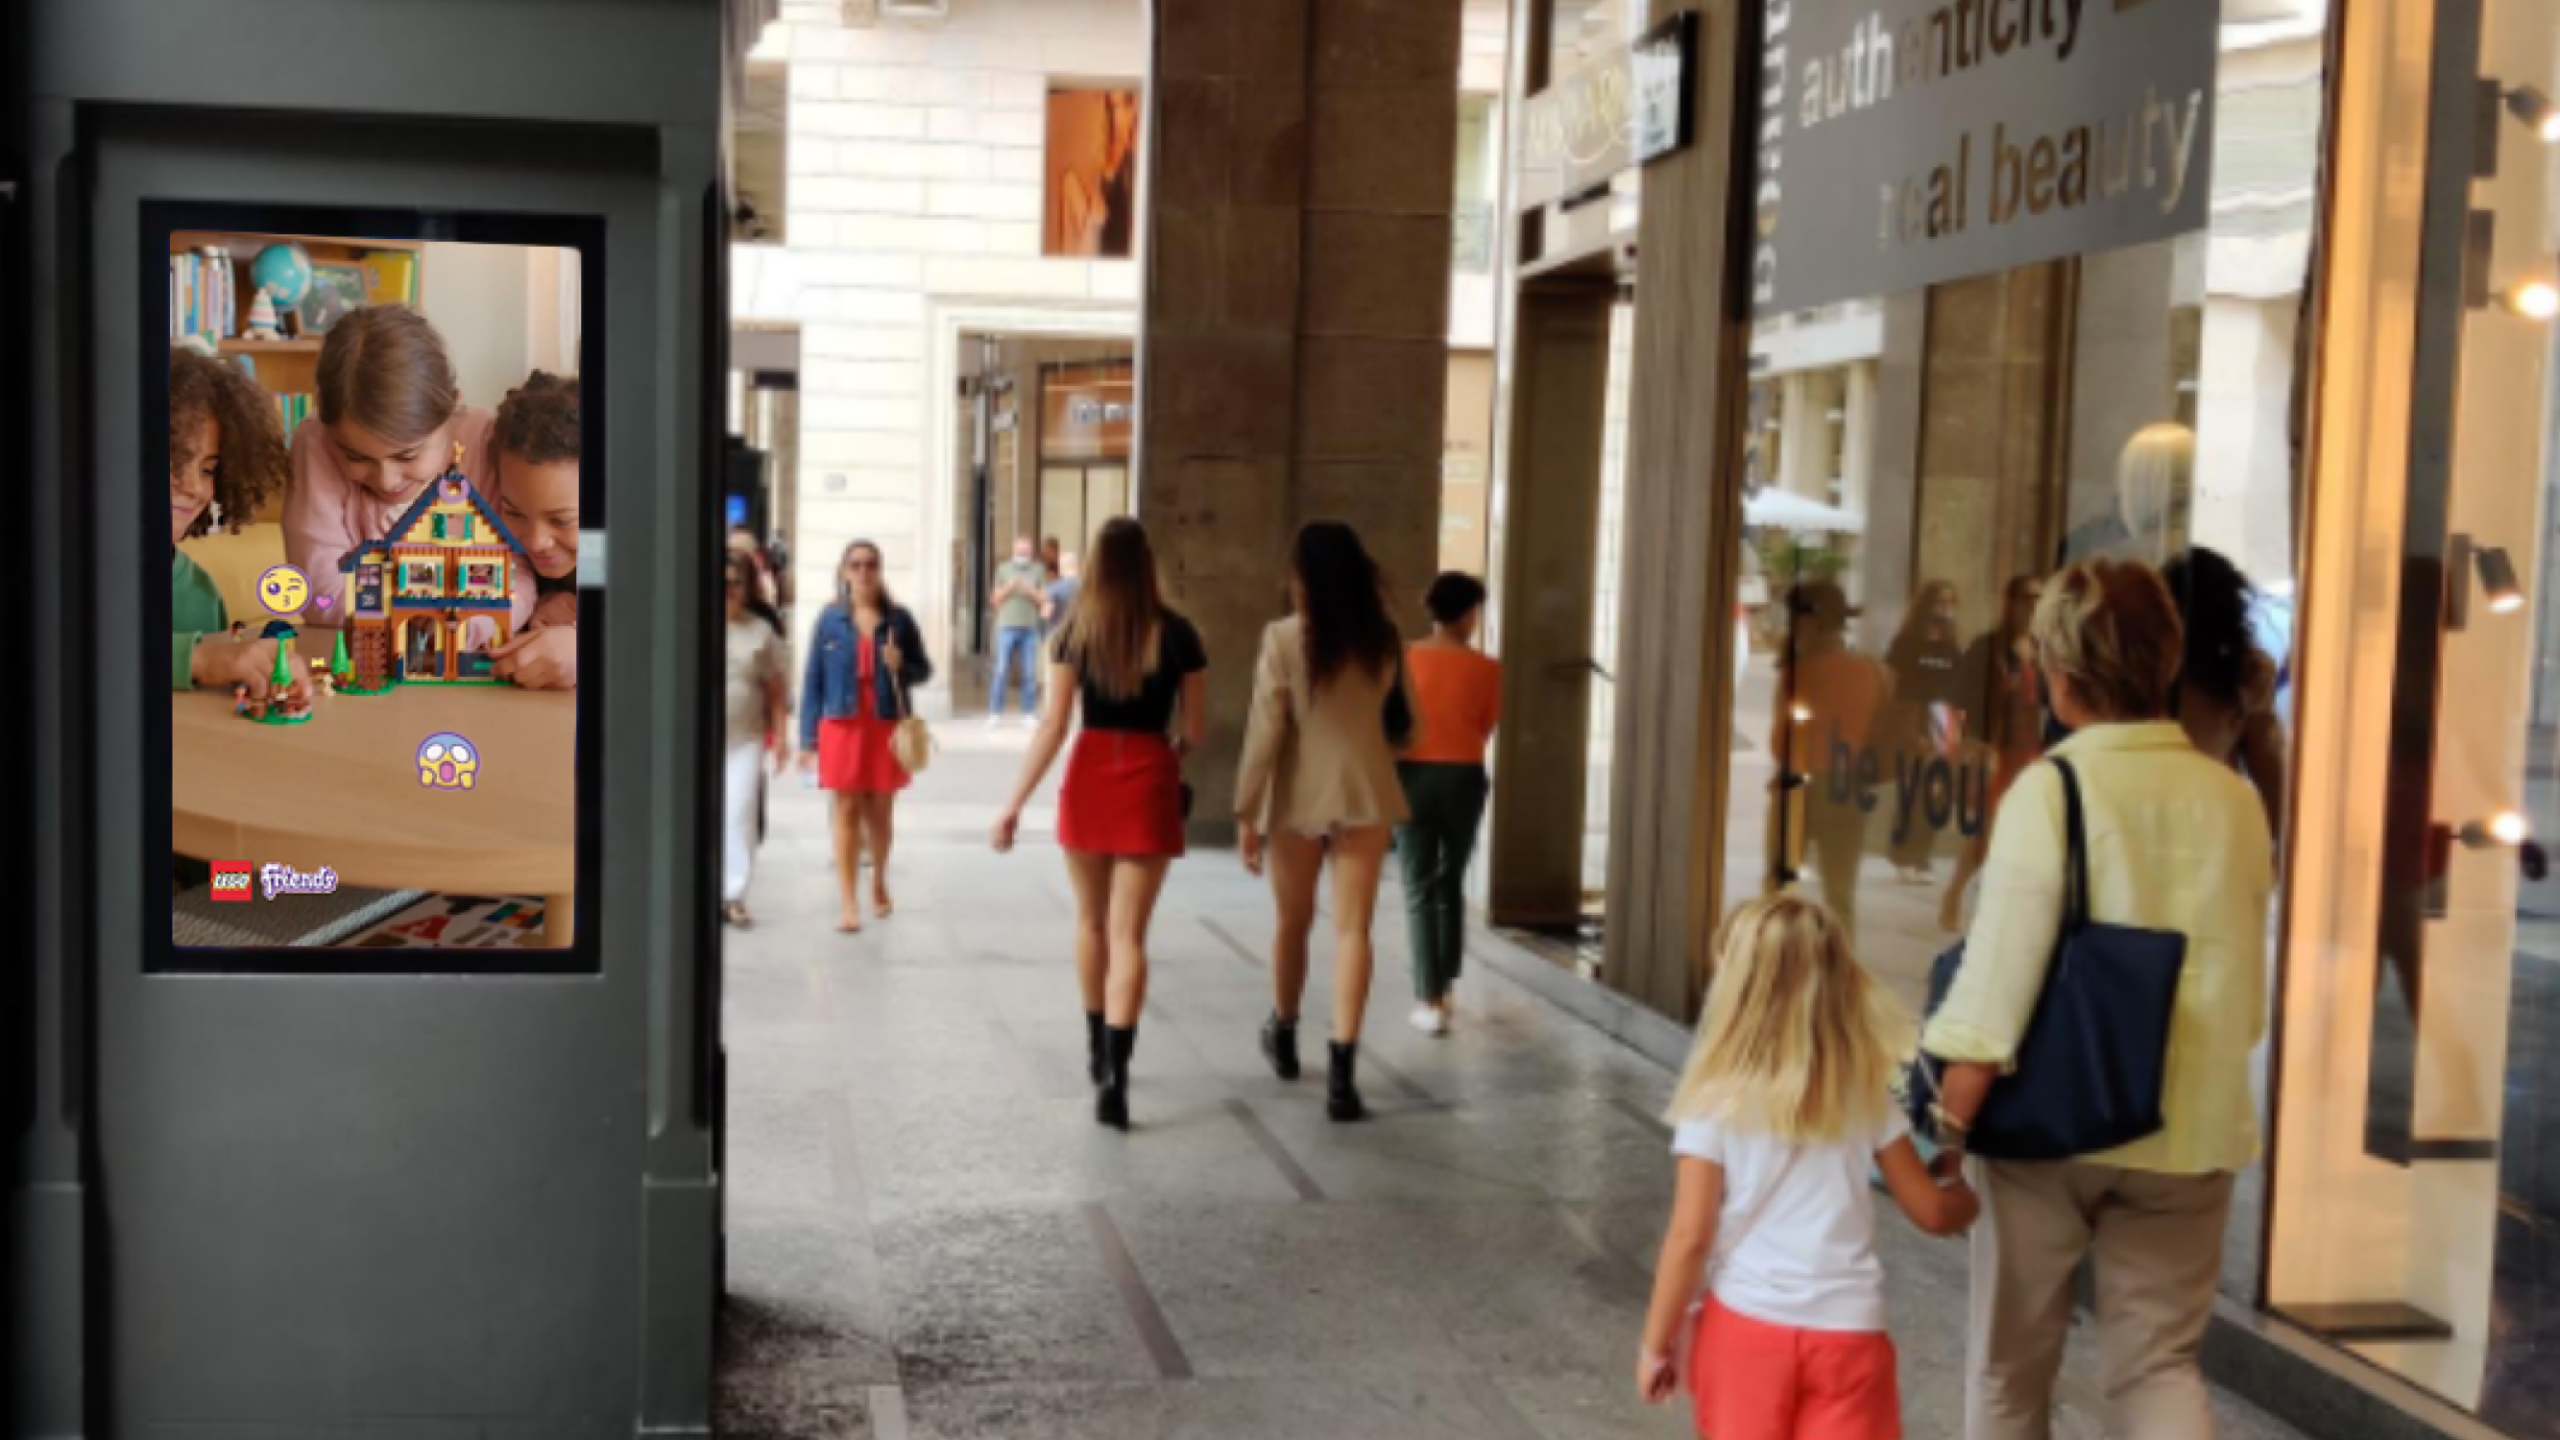 World famous toy production company leveraged custom audience targeting via programmatic DOOH to drive footfall into stores across Italy.